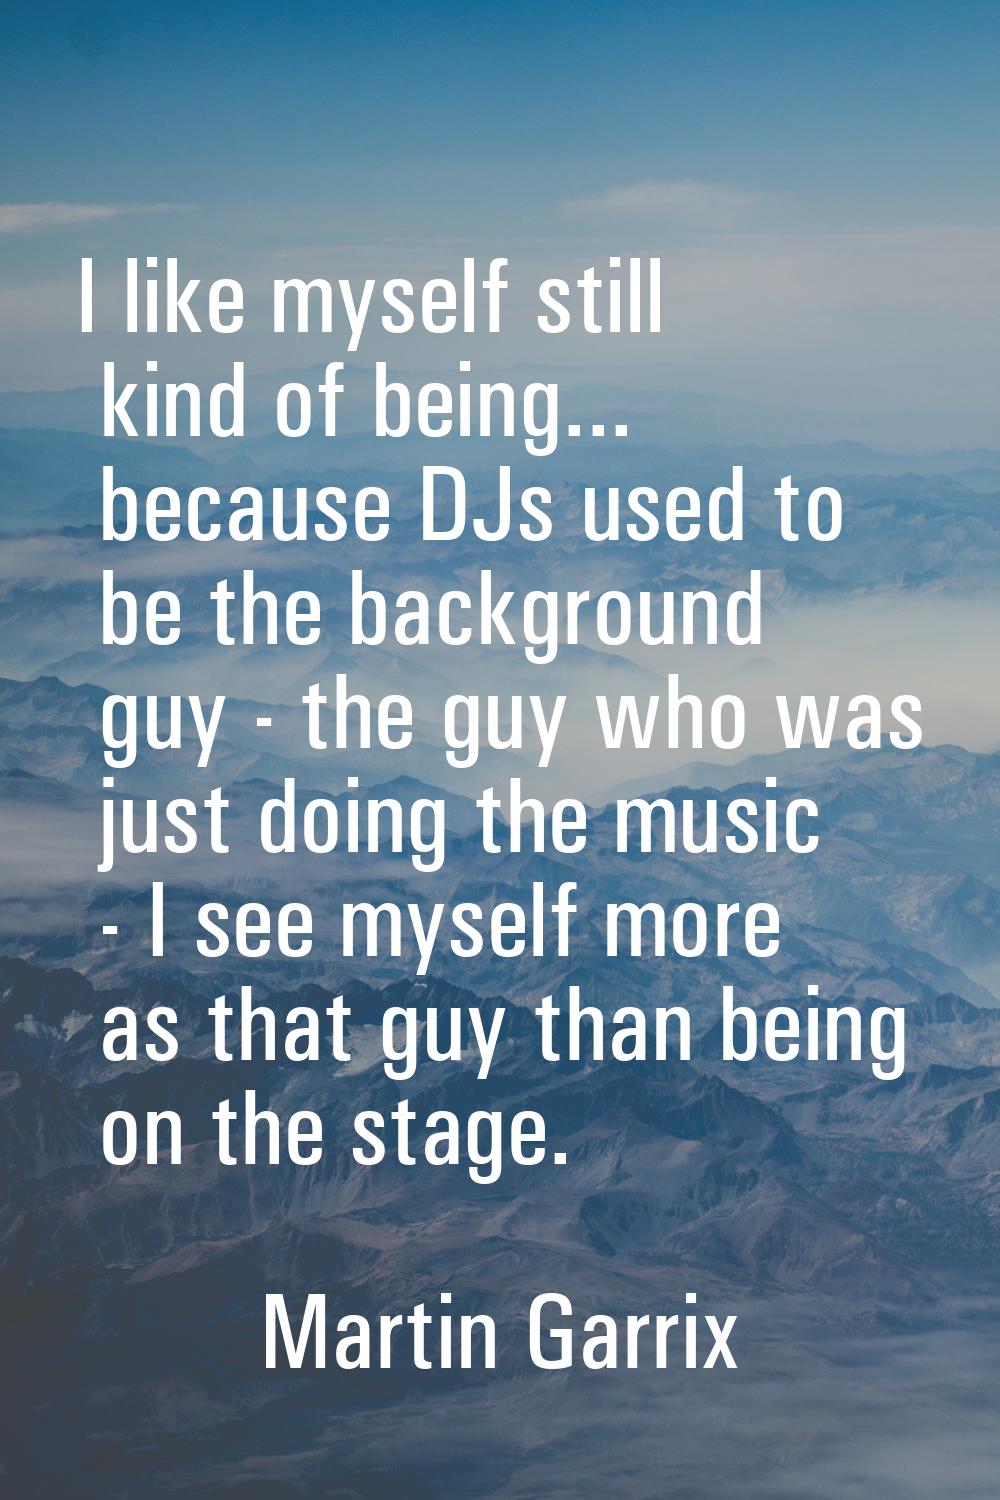 I like myself still kind of being... because DJs used to be the background guy - the guy who was ju